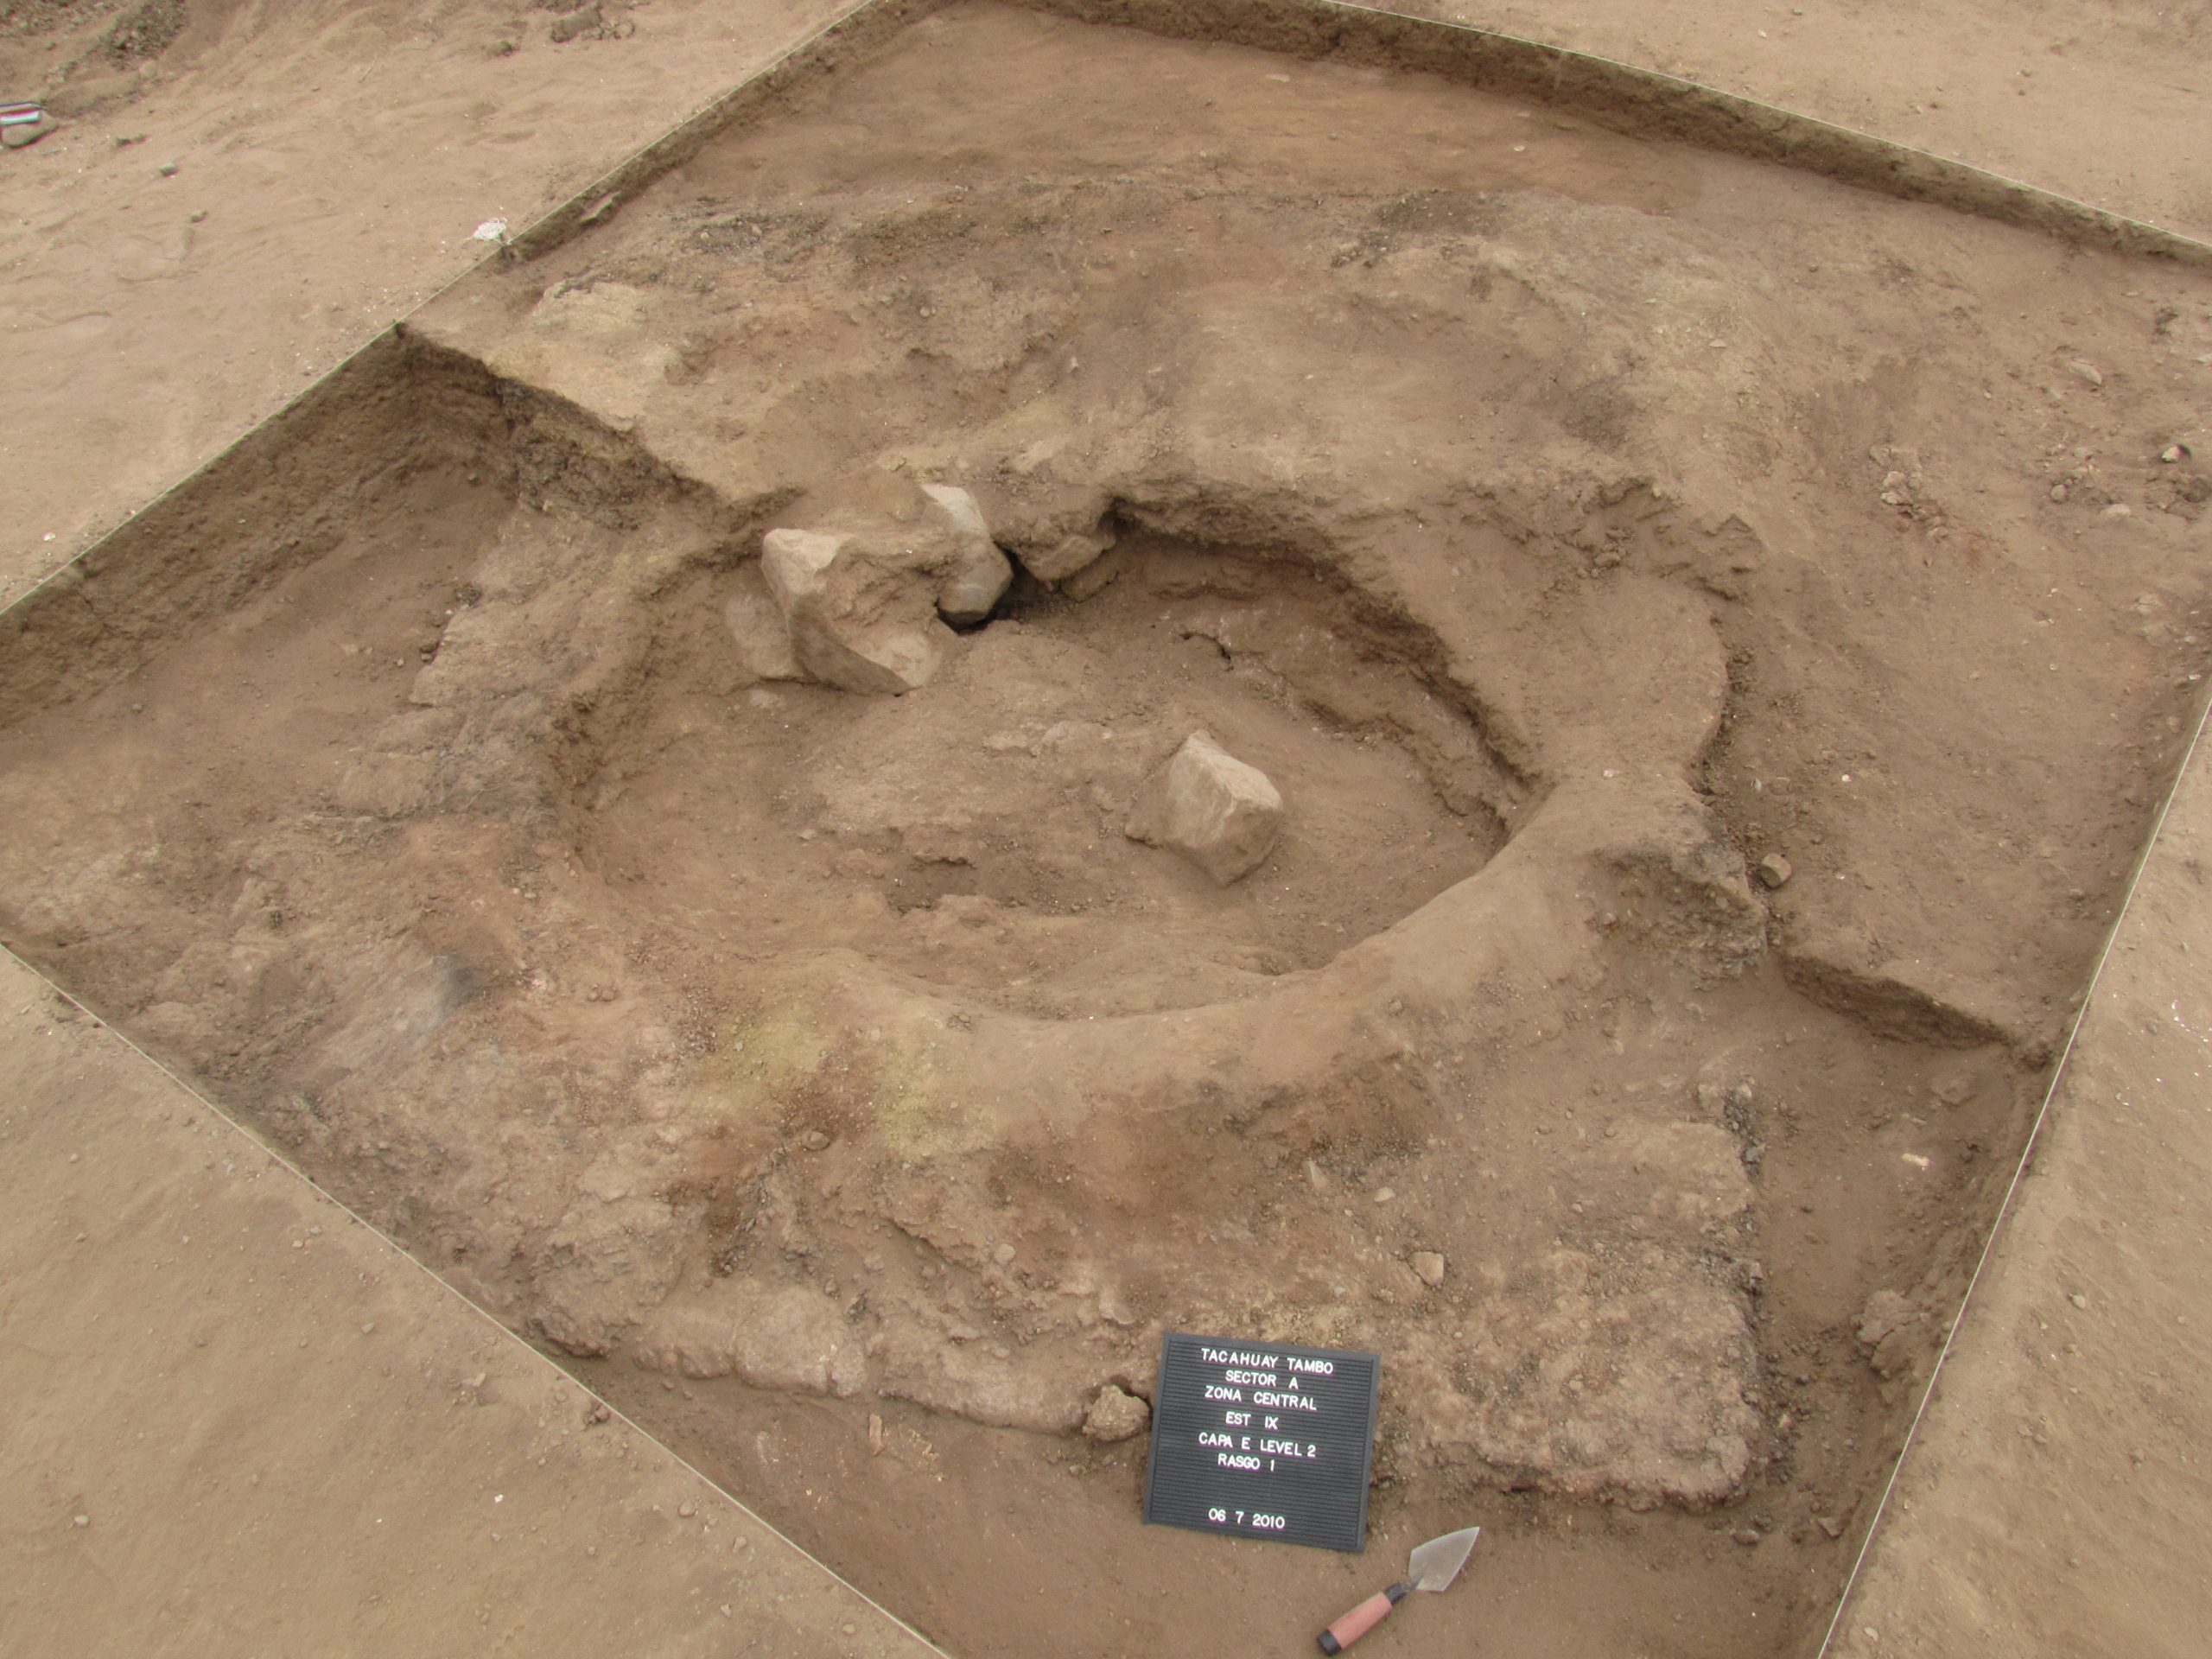 A photo of the square-shaped excavation site of the Tacahuay Tambo tomb. All that is visible so far is a mostly filled-in, circular hole carved into a square rock. 